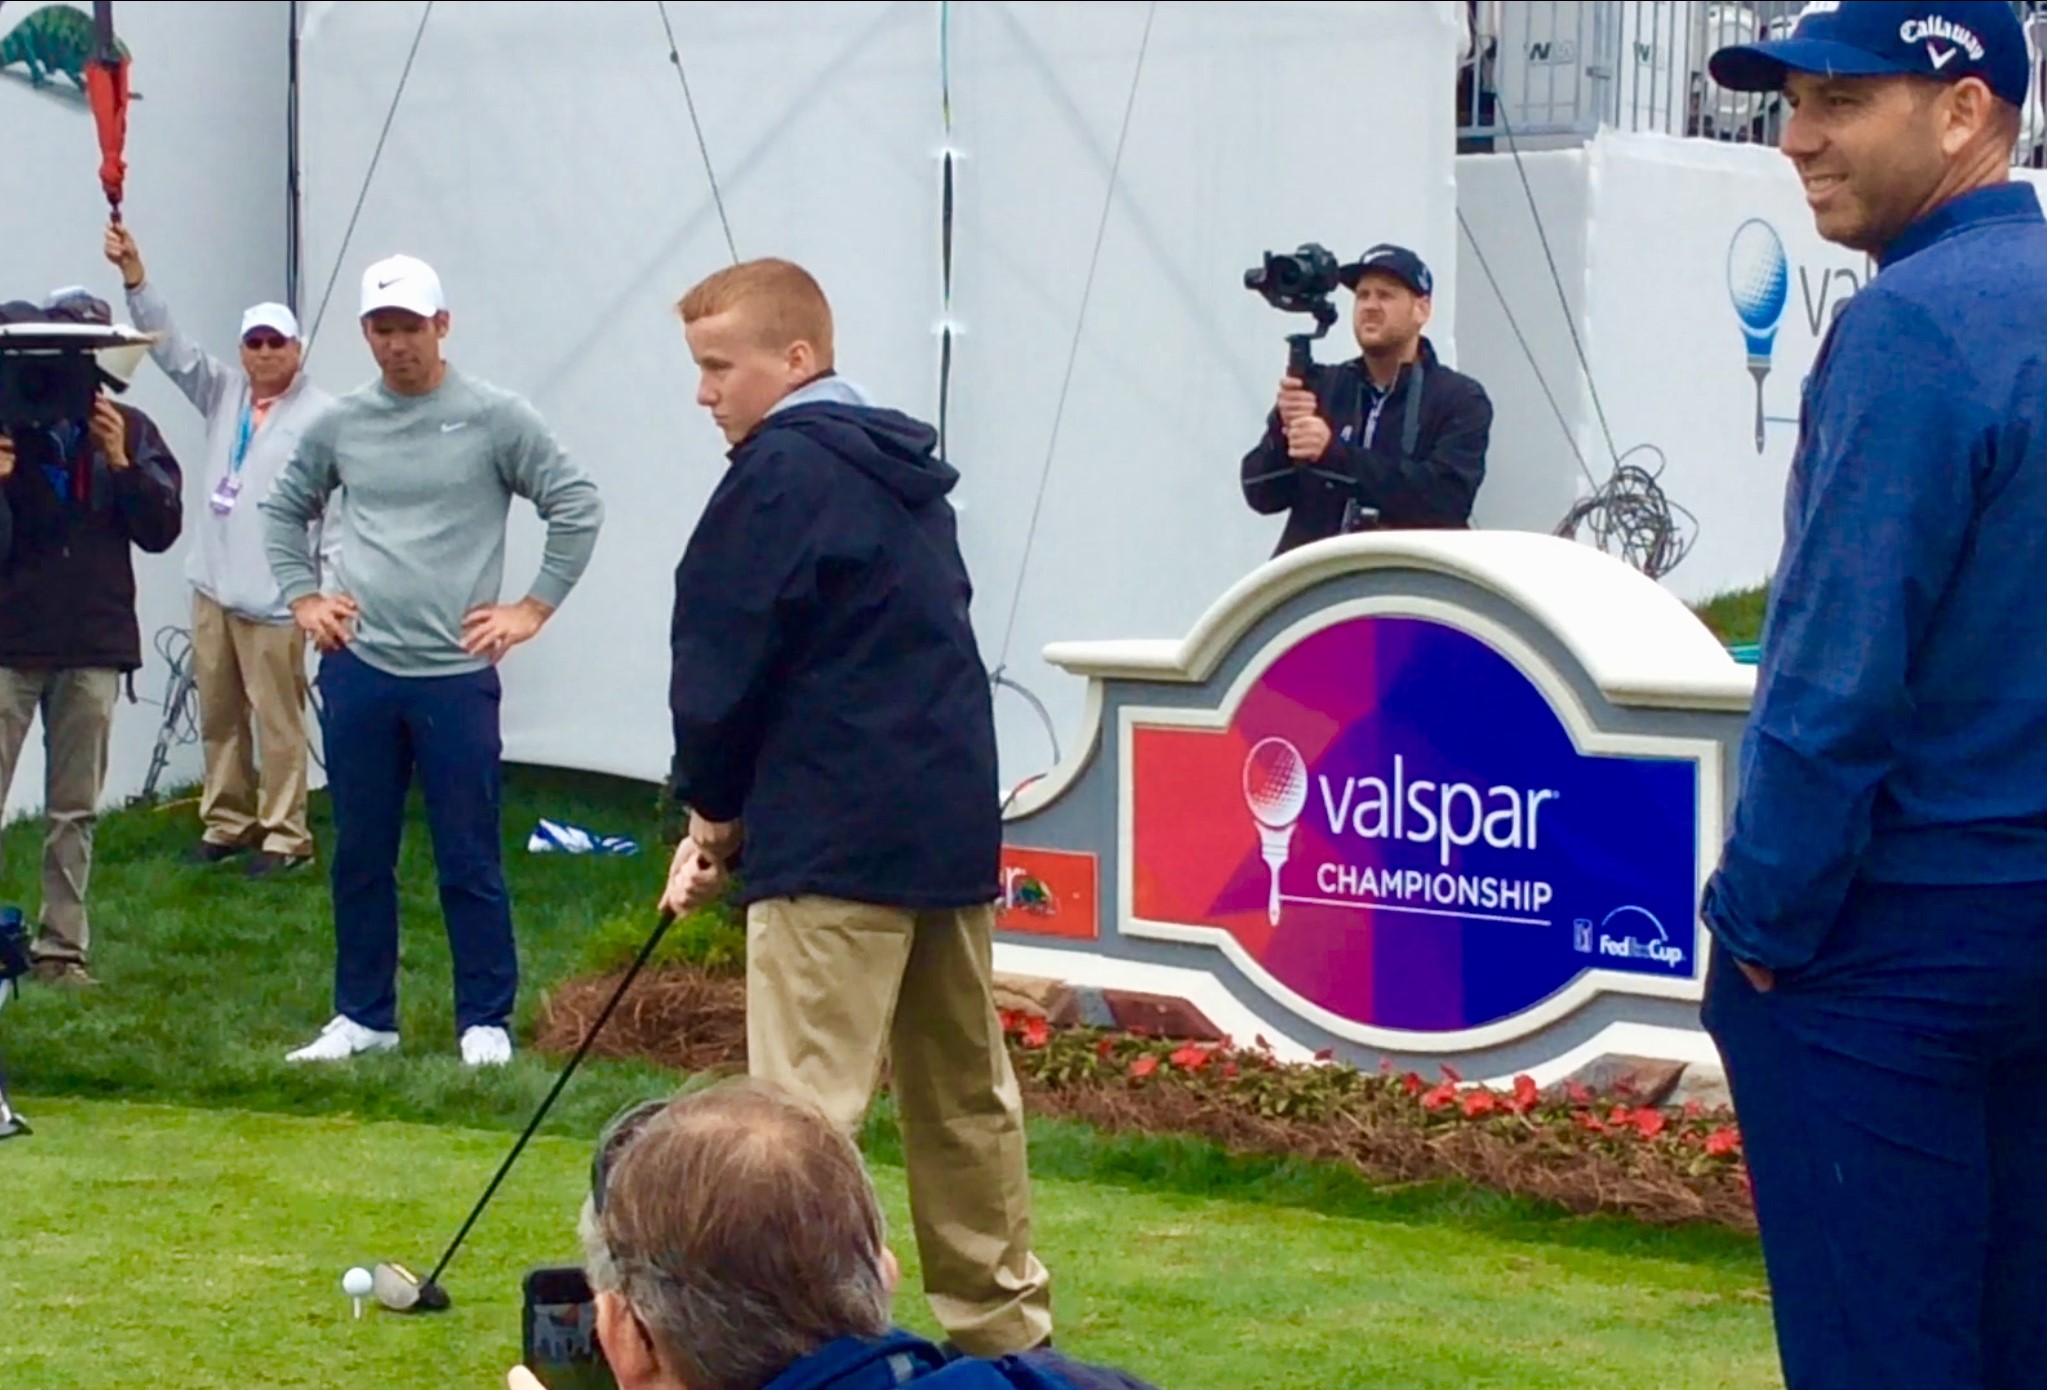 Ronan prepares to drive on the 18th (with Paul Casey and Sergio Garcia looking on) (March 2019)